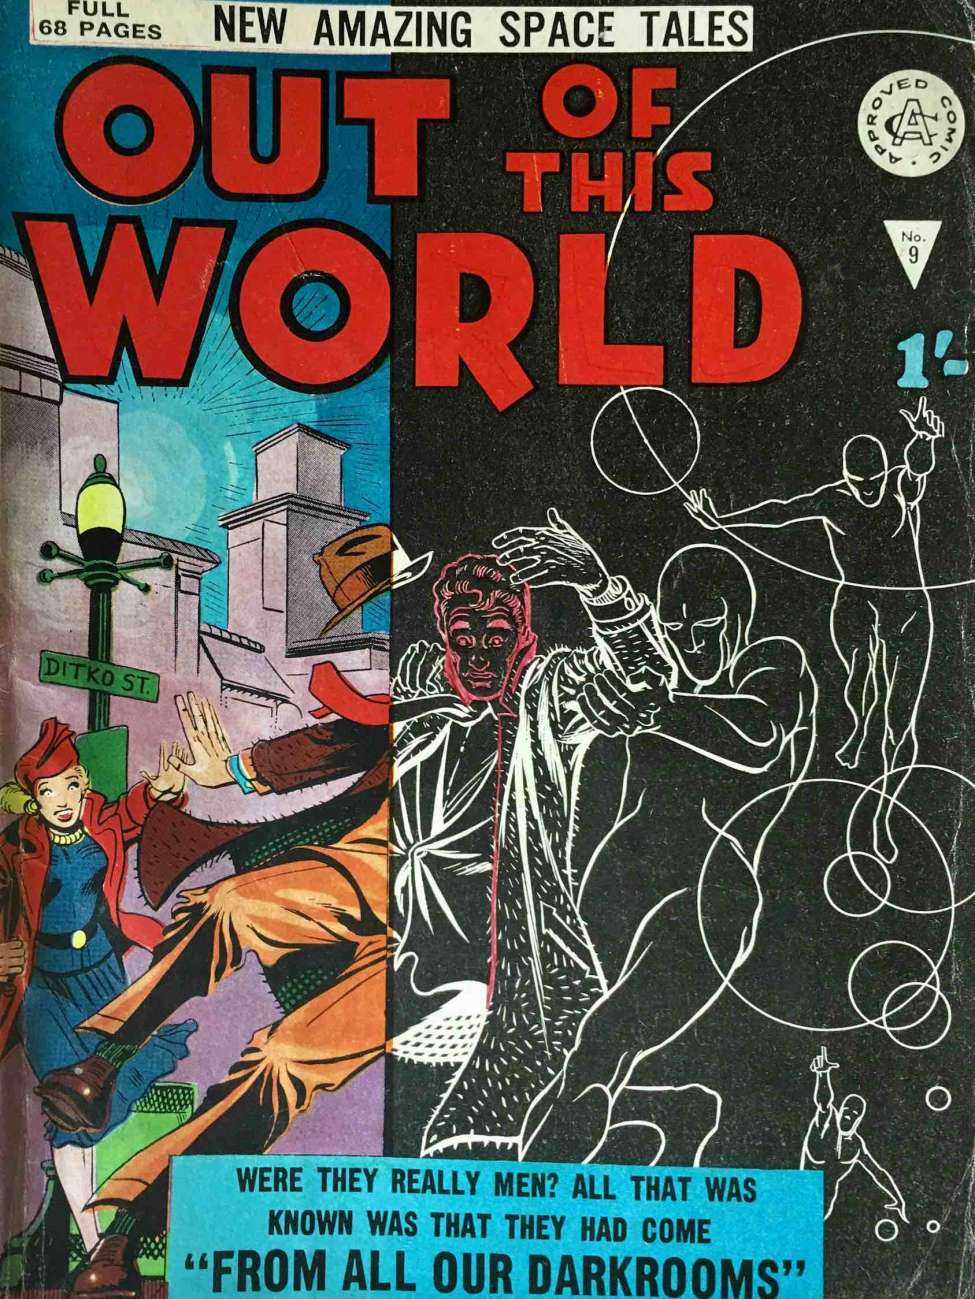 Out of this World 9 - Version 1 (UK Comic Books)